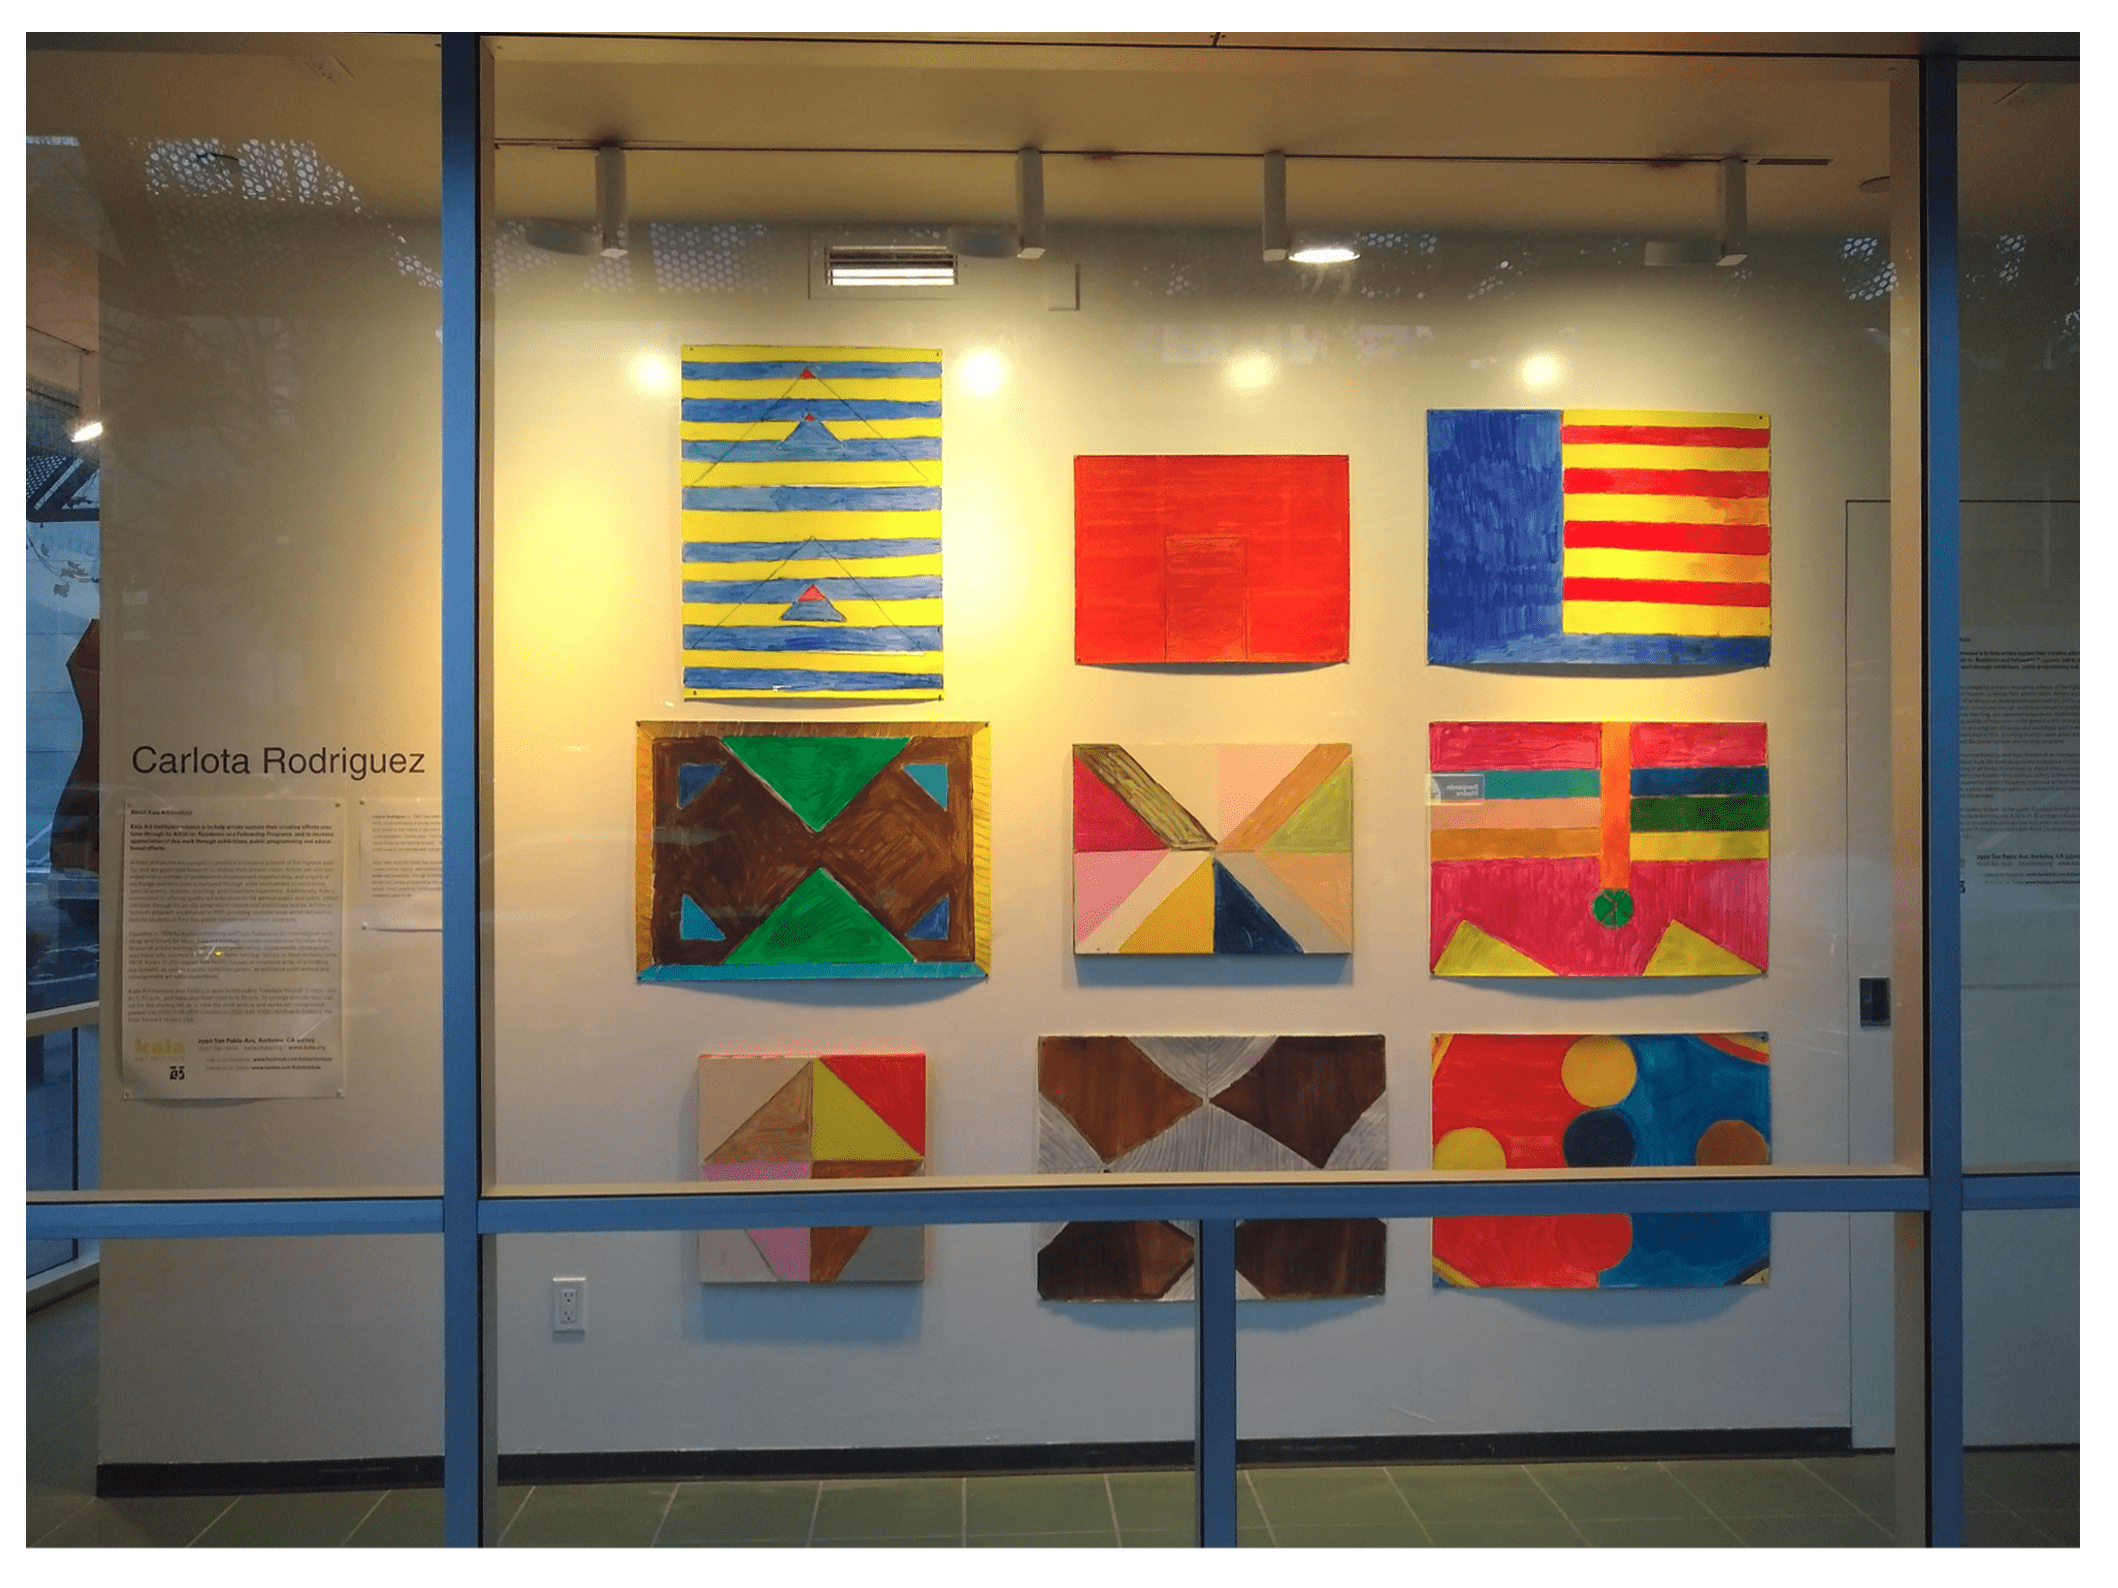 a 3x3 grid of paintings by Carlota Rodriguez mounted on a wall behind glass.